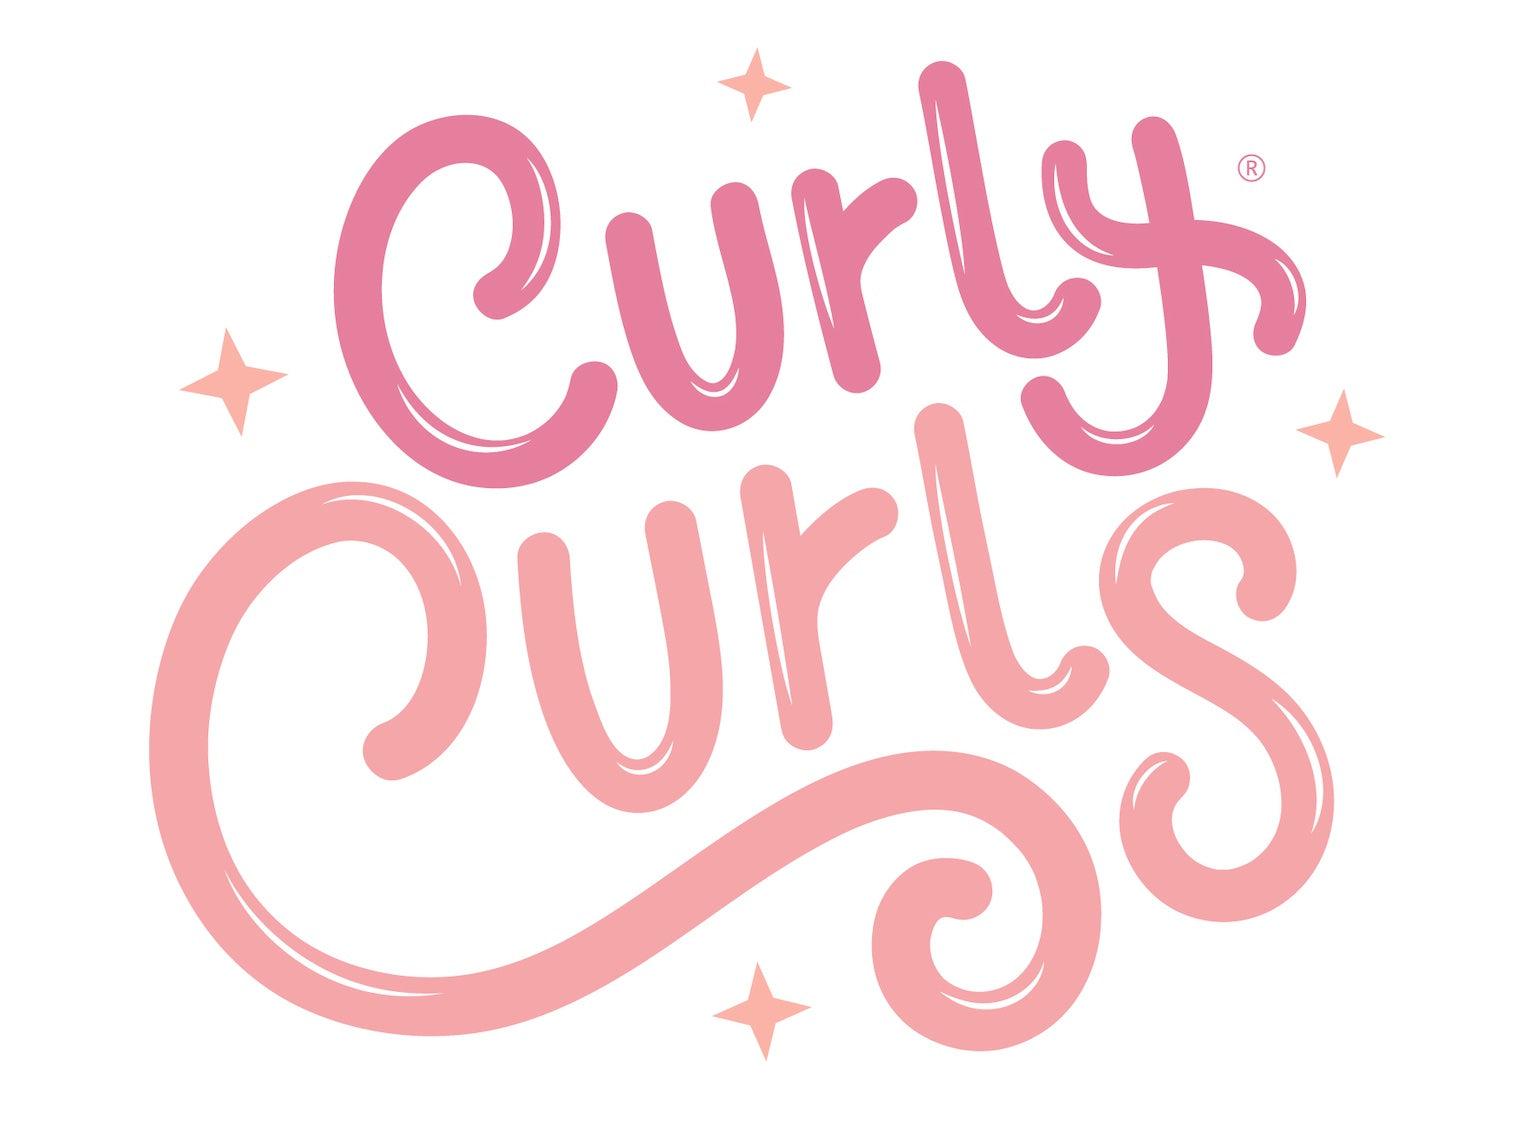 Curly Curls for Hair Products